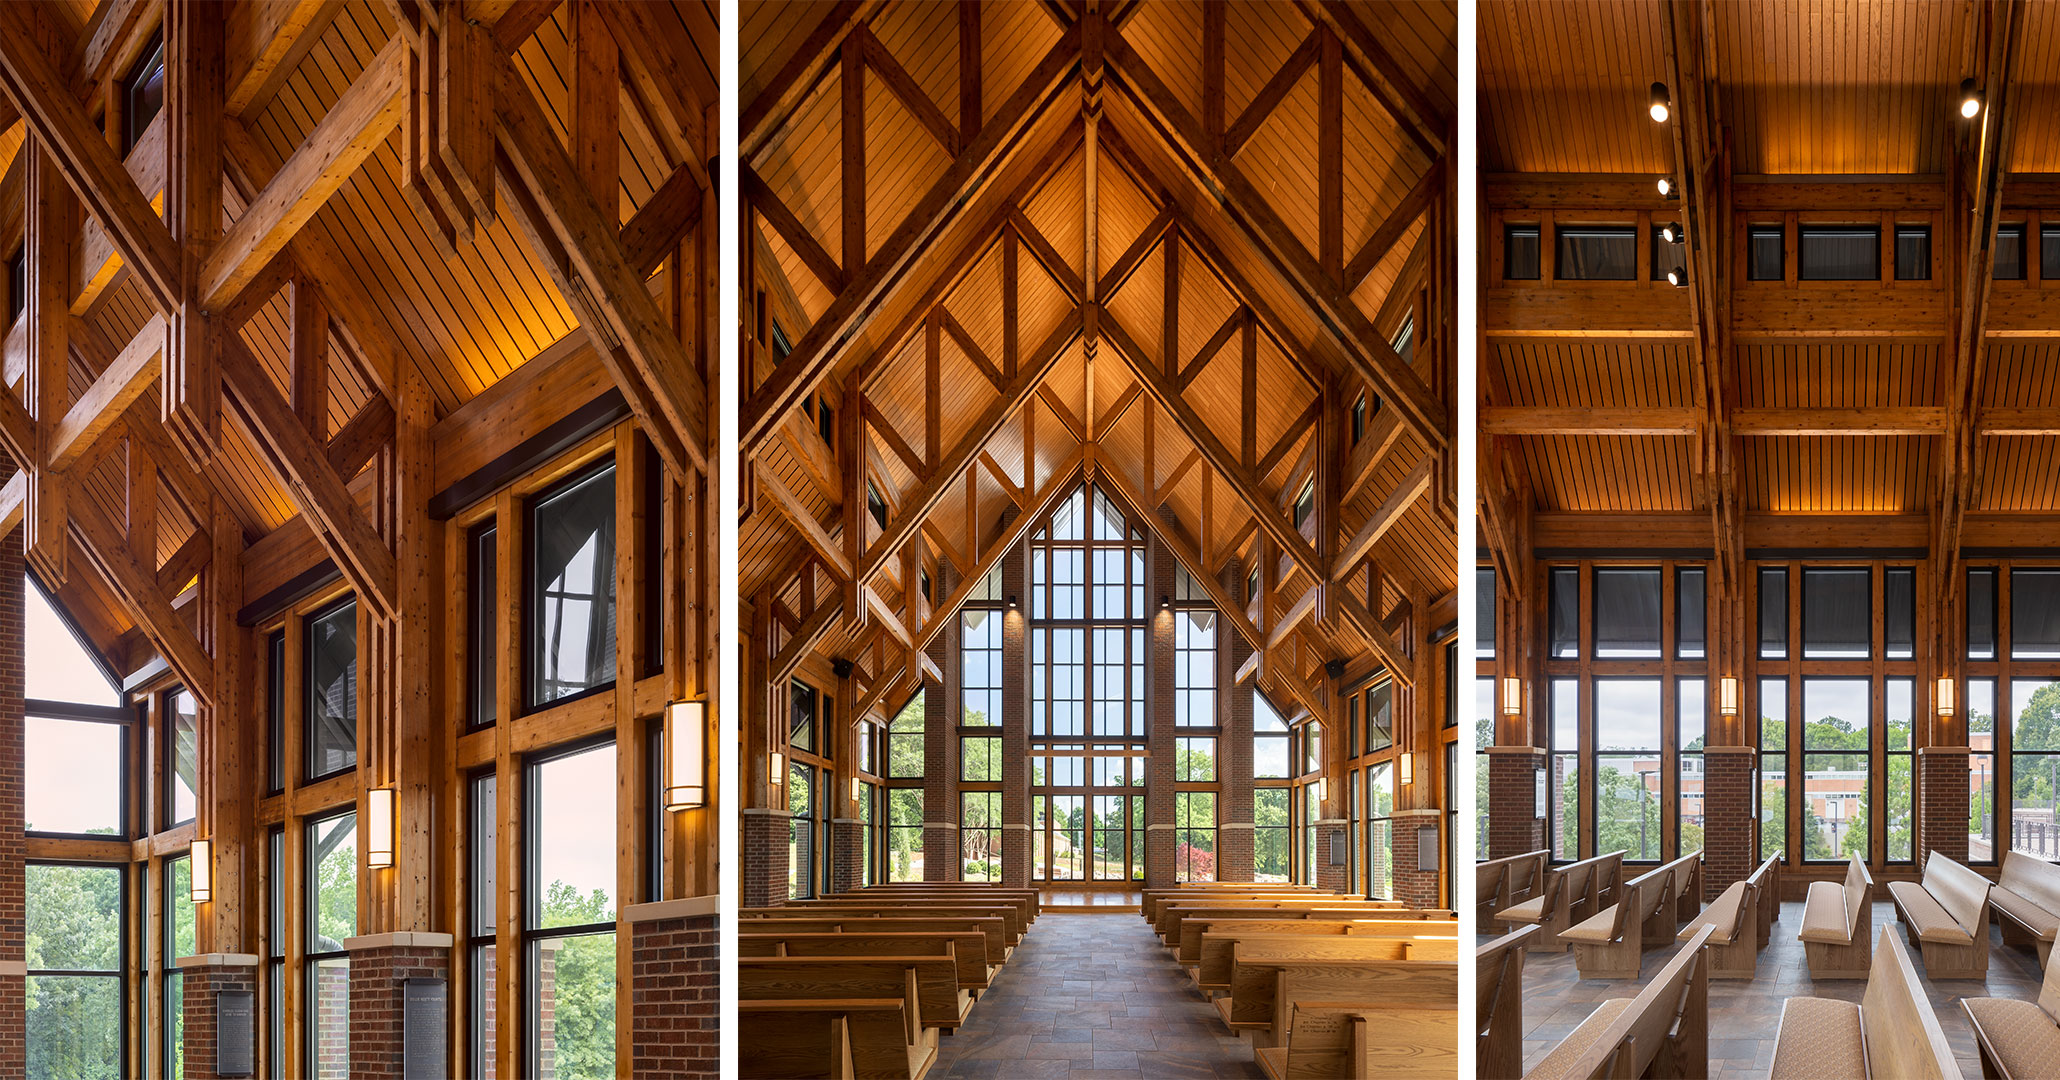 Wooden interior brings nature inside the Clemson Chapel designed by BOUDREAUX.